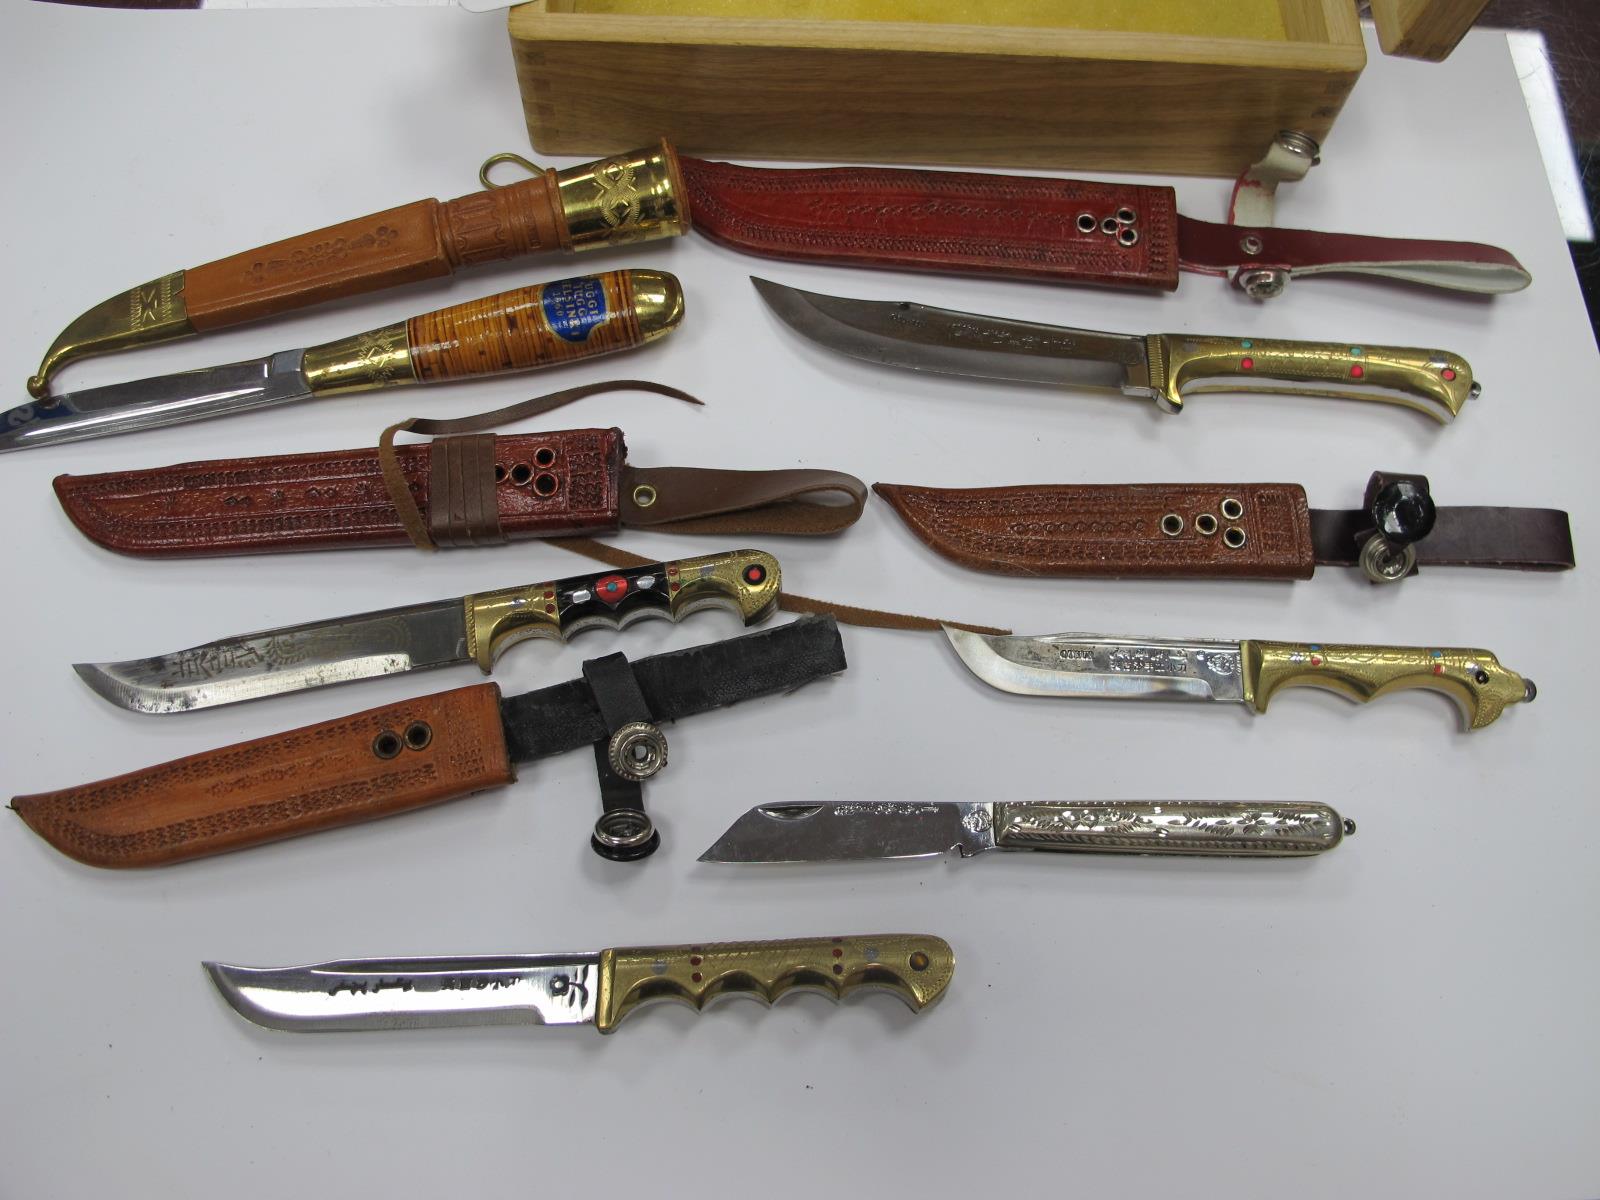 A Quantity of Asian Style Bowie Knives, all with sheaths, with ornate brass handles, some jeweled,